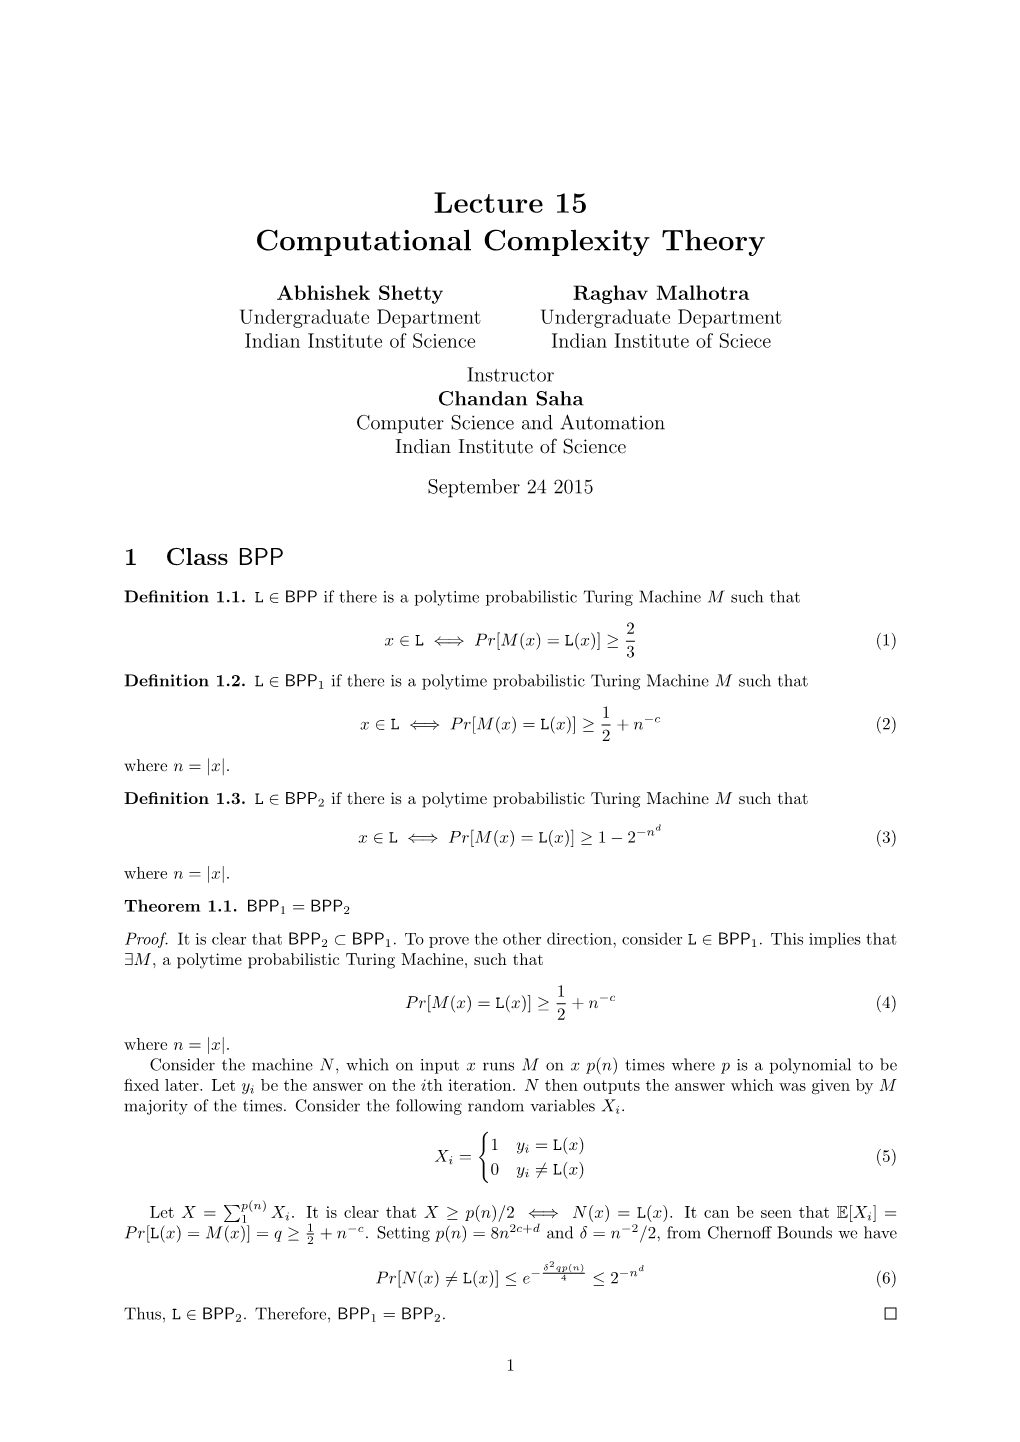 Lecture 15 Computational Complexity Theory